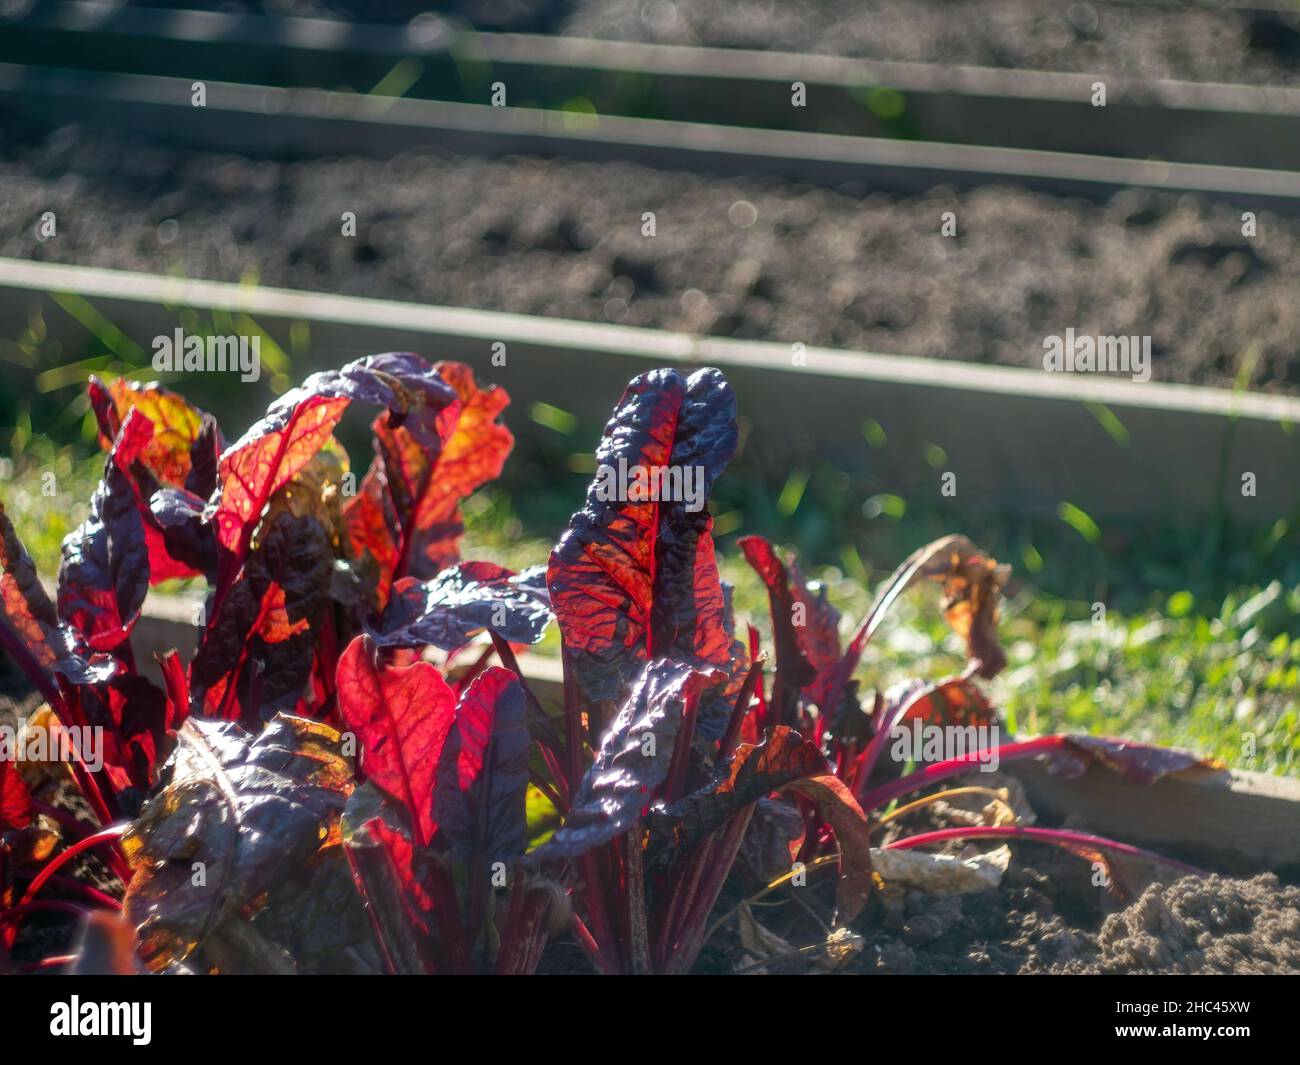 chard salad on the bed, in autumn Stock Photo